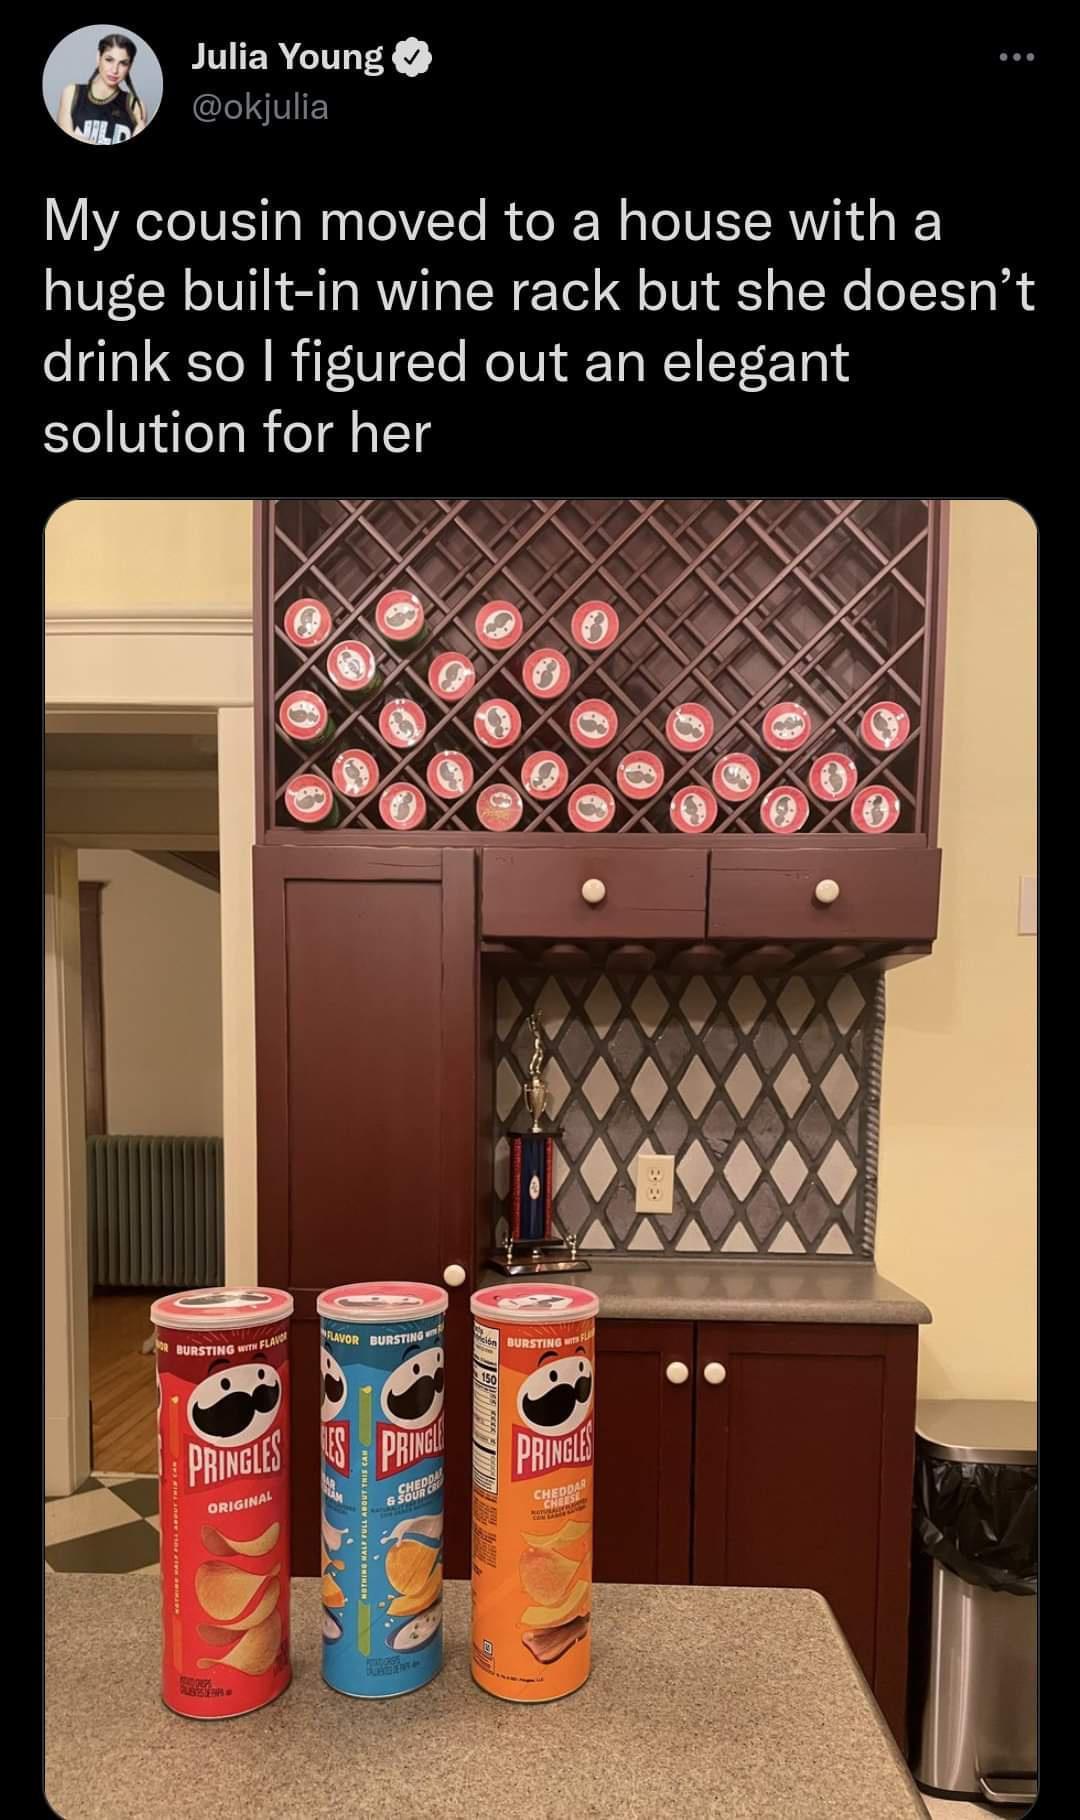 dank memes - furniture - Julia Young My cousin moved to a house with a huge builtin wine rack but she doesn't drink so I figured out an elegant solution for her Bursting With Flavo Flavor Bursting Pringles Es Pringle Original & Chedda Feast Corps M Nothin